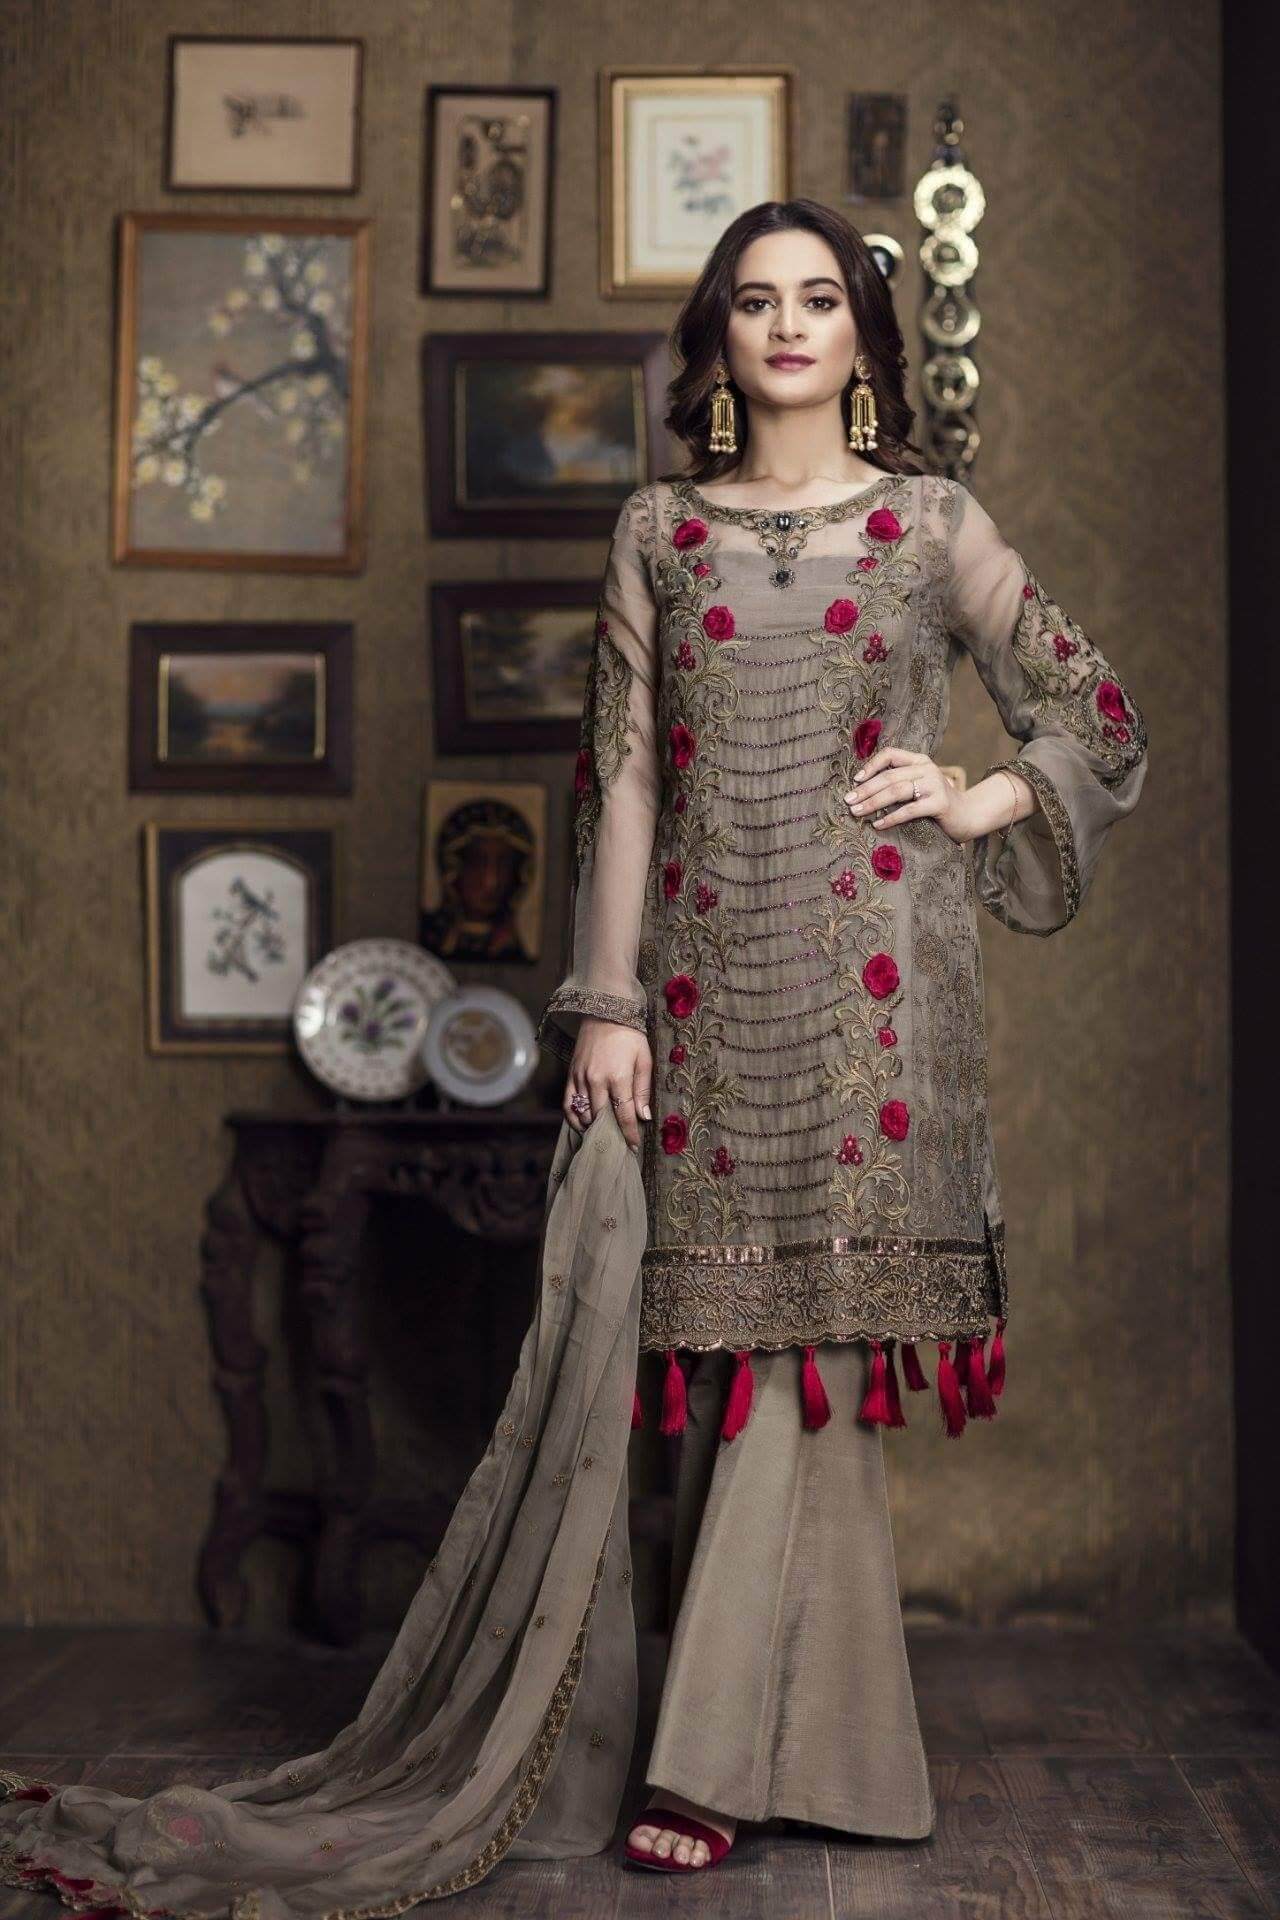 Shop Indian Dresses & Clothes Online | Latest Traditional Indian Outfits  Designs